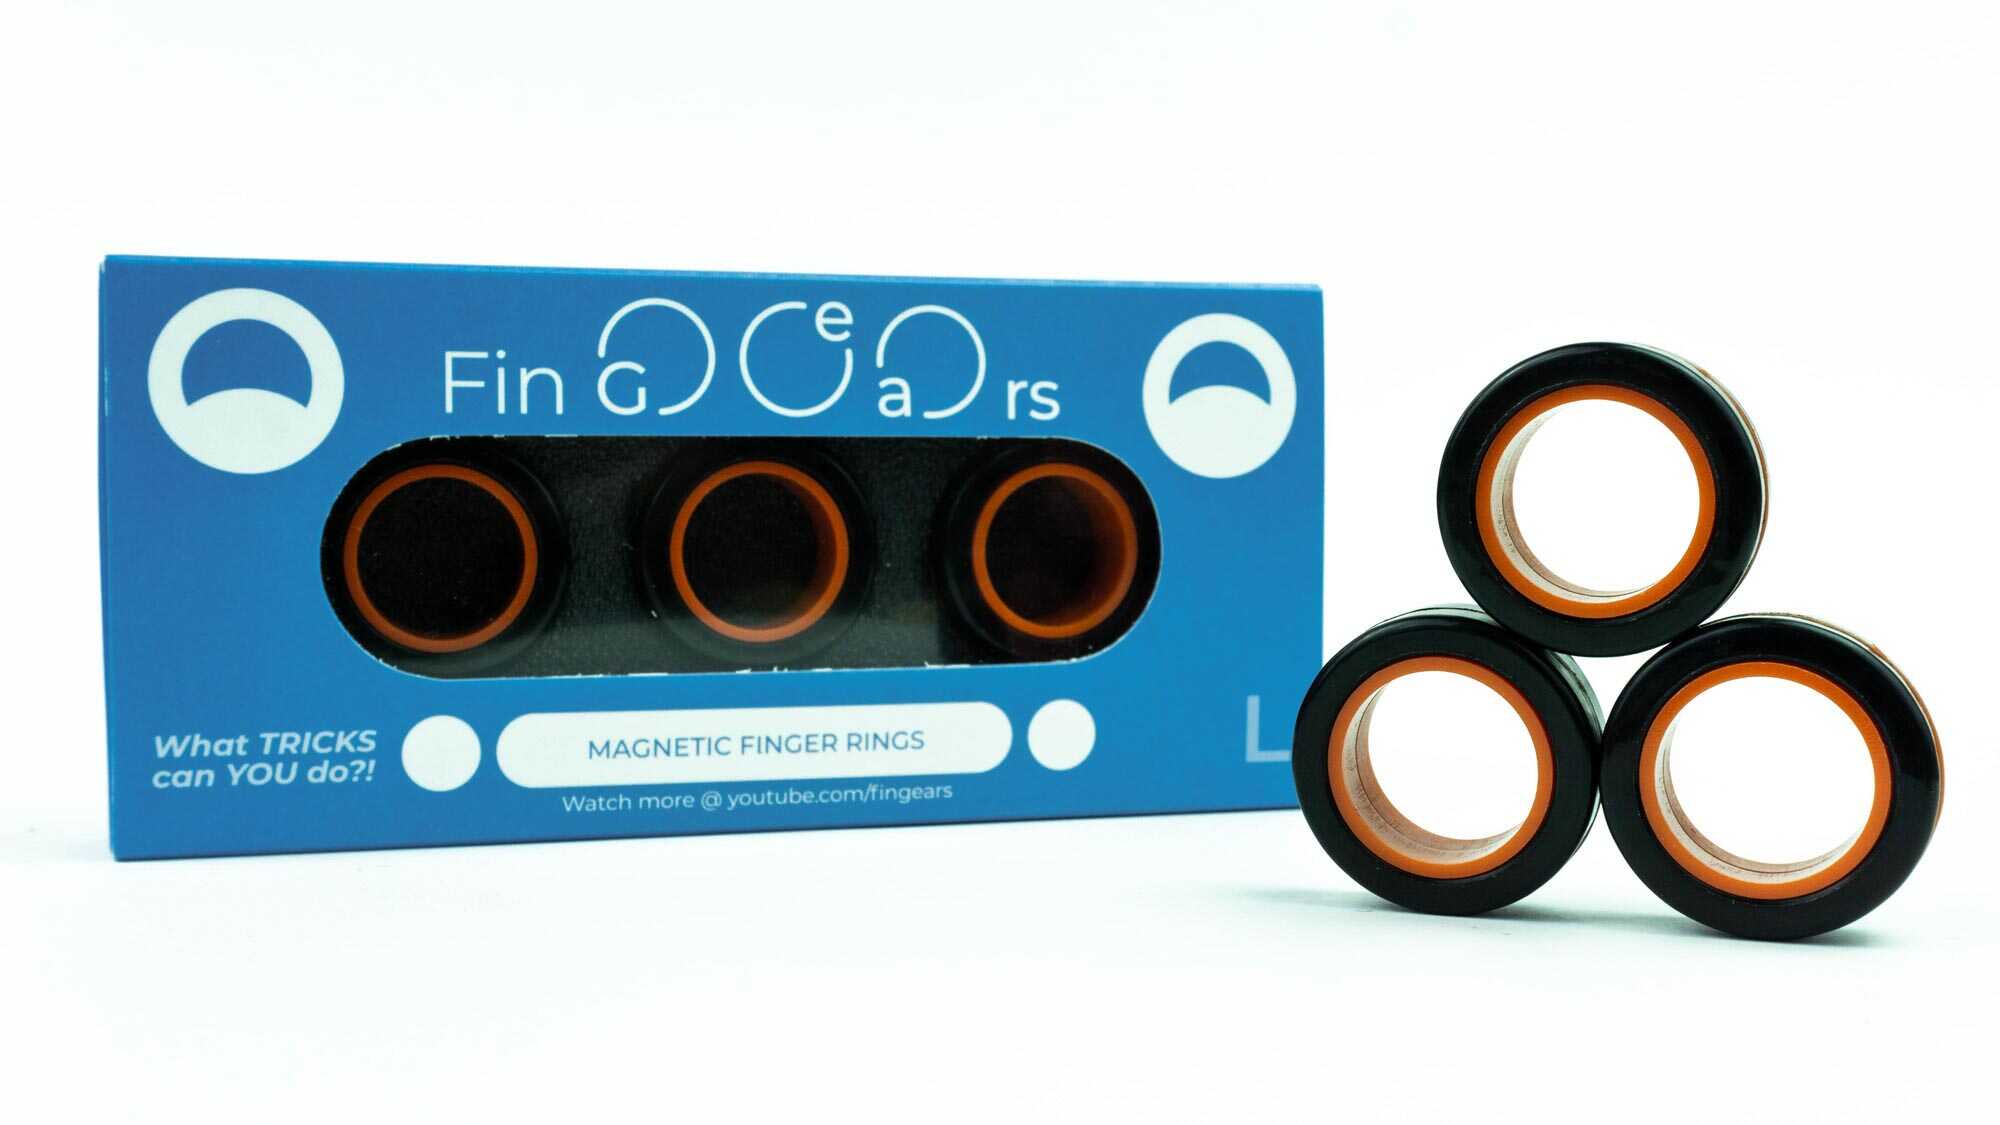 Fingears - hack your braine with magnetic rings